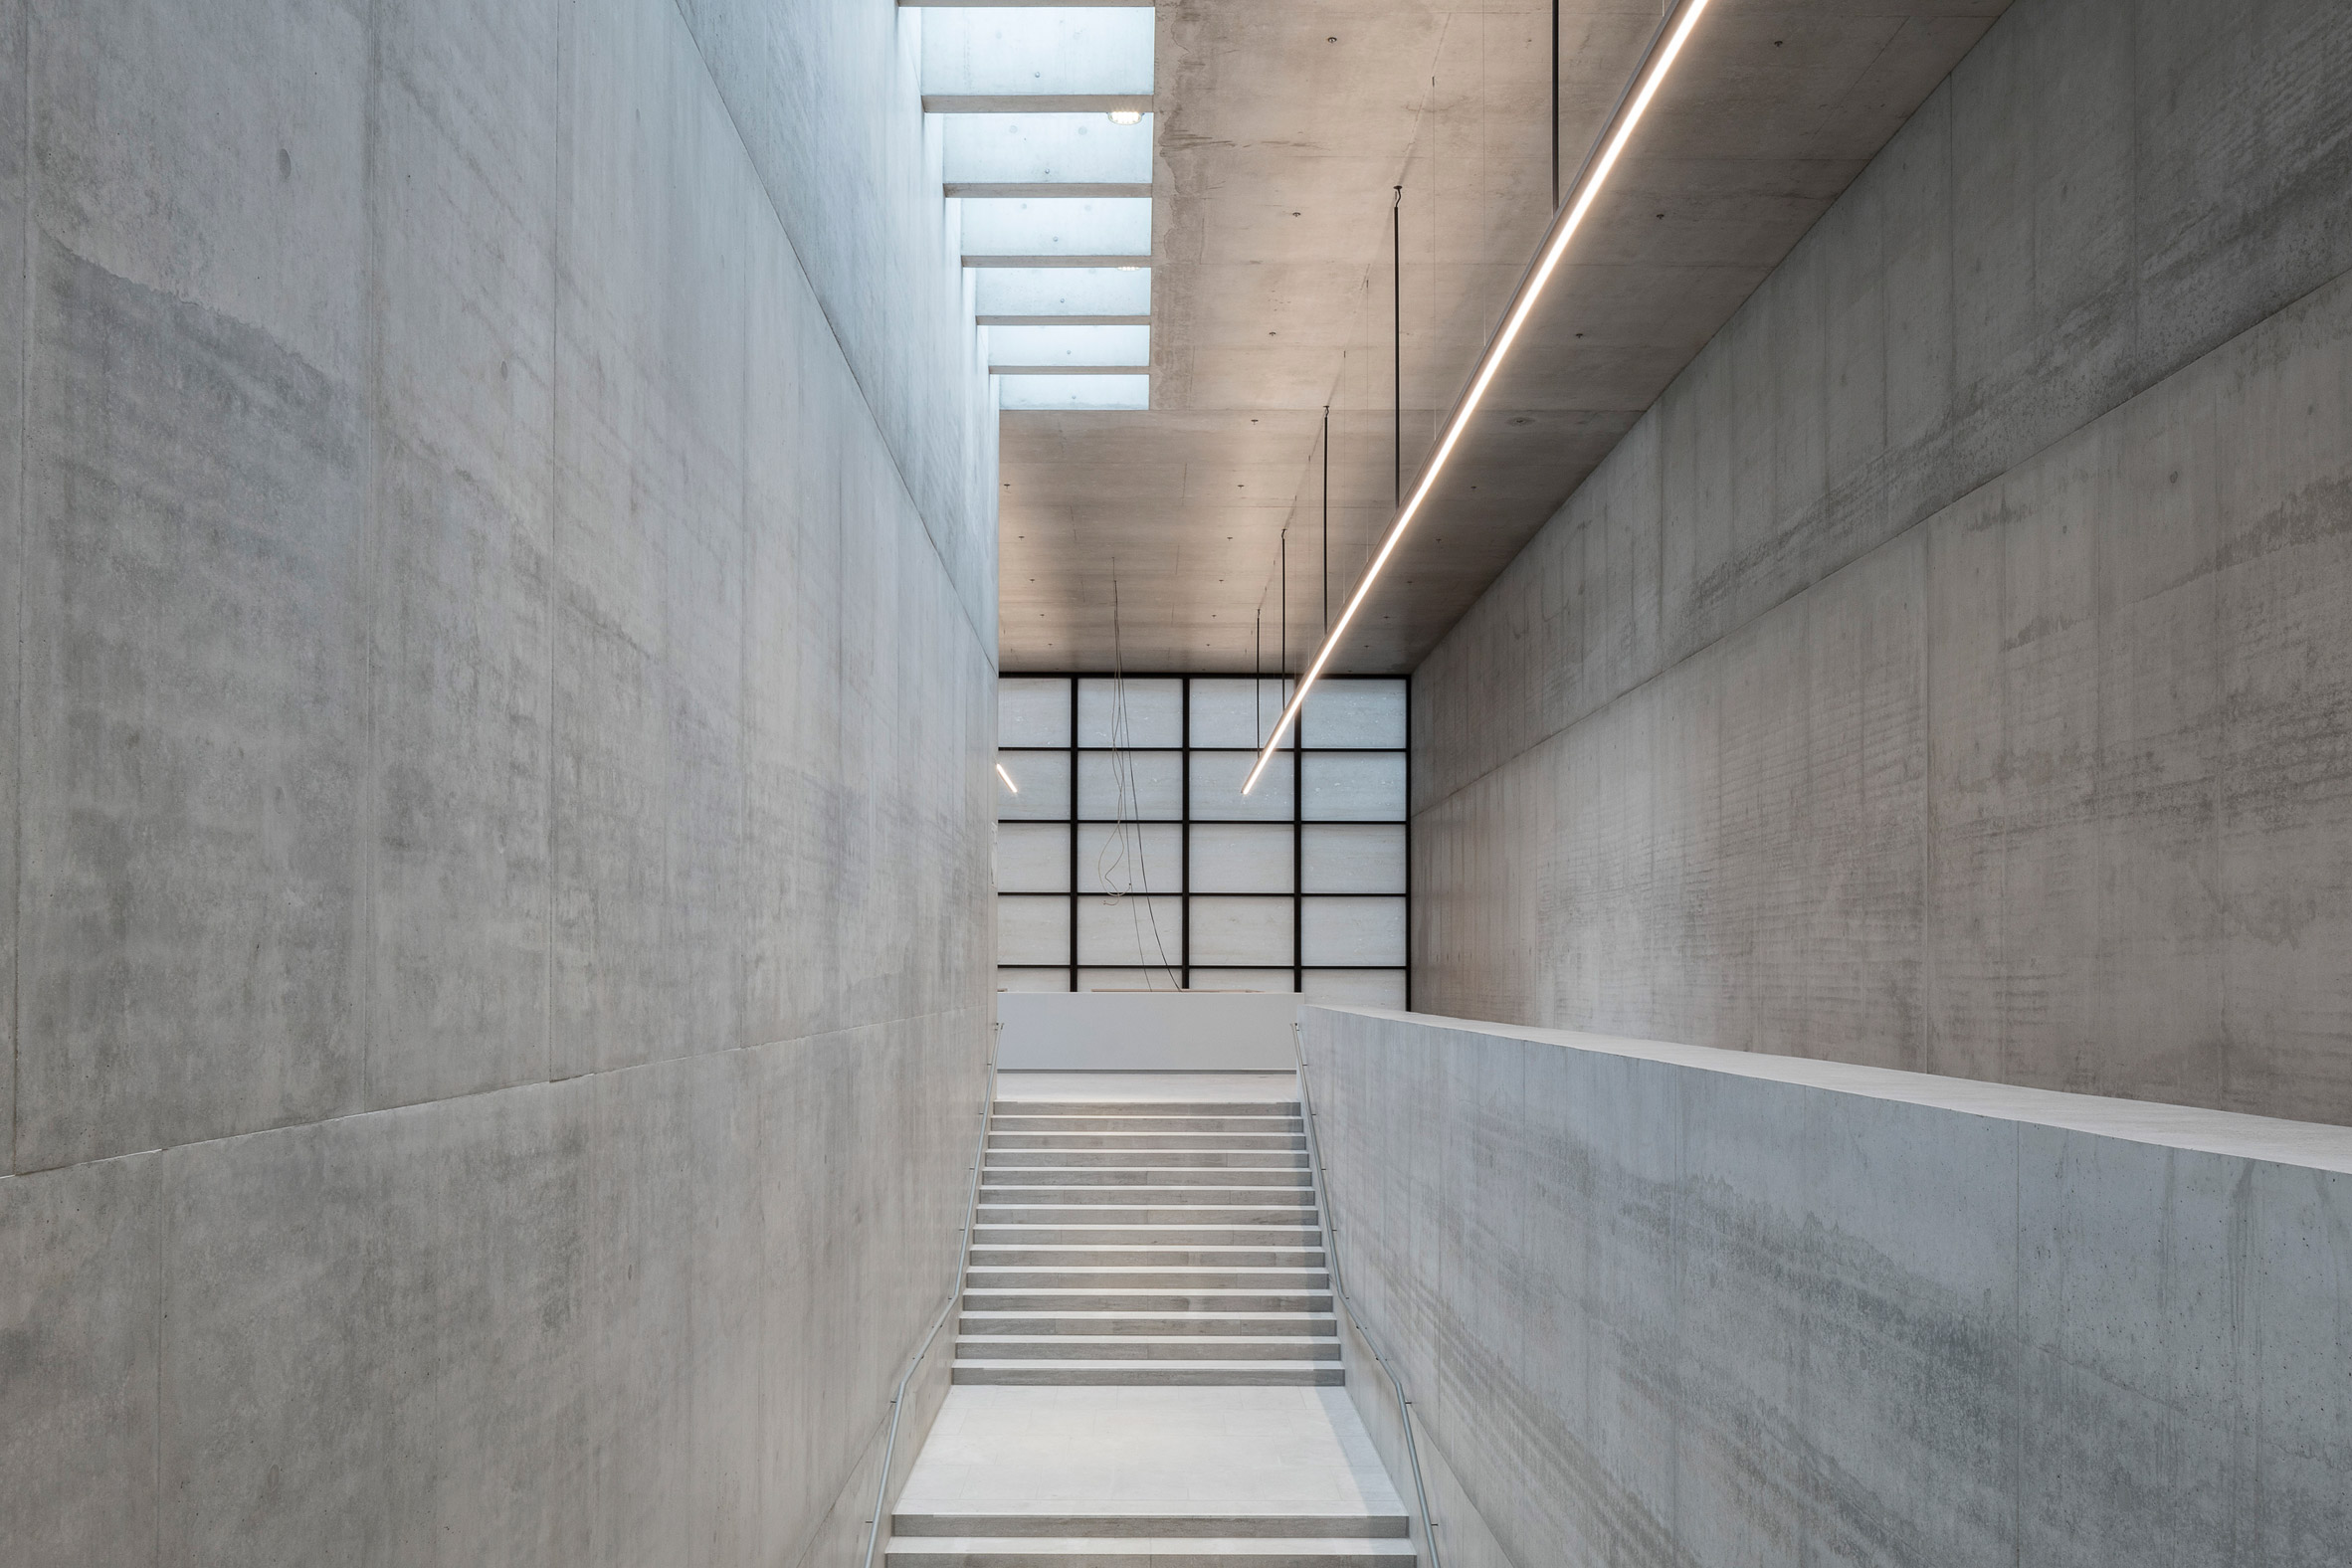 Interior of James Simon Galerie in Berlin by David Chipperfield Architects